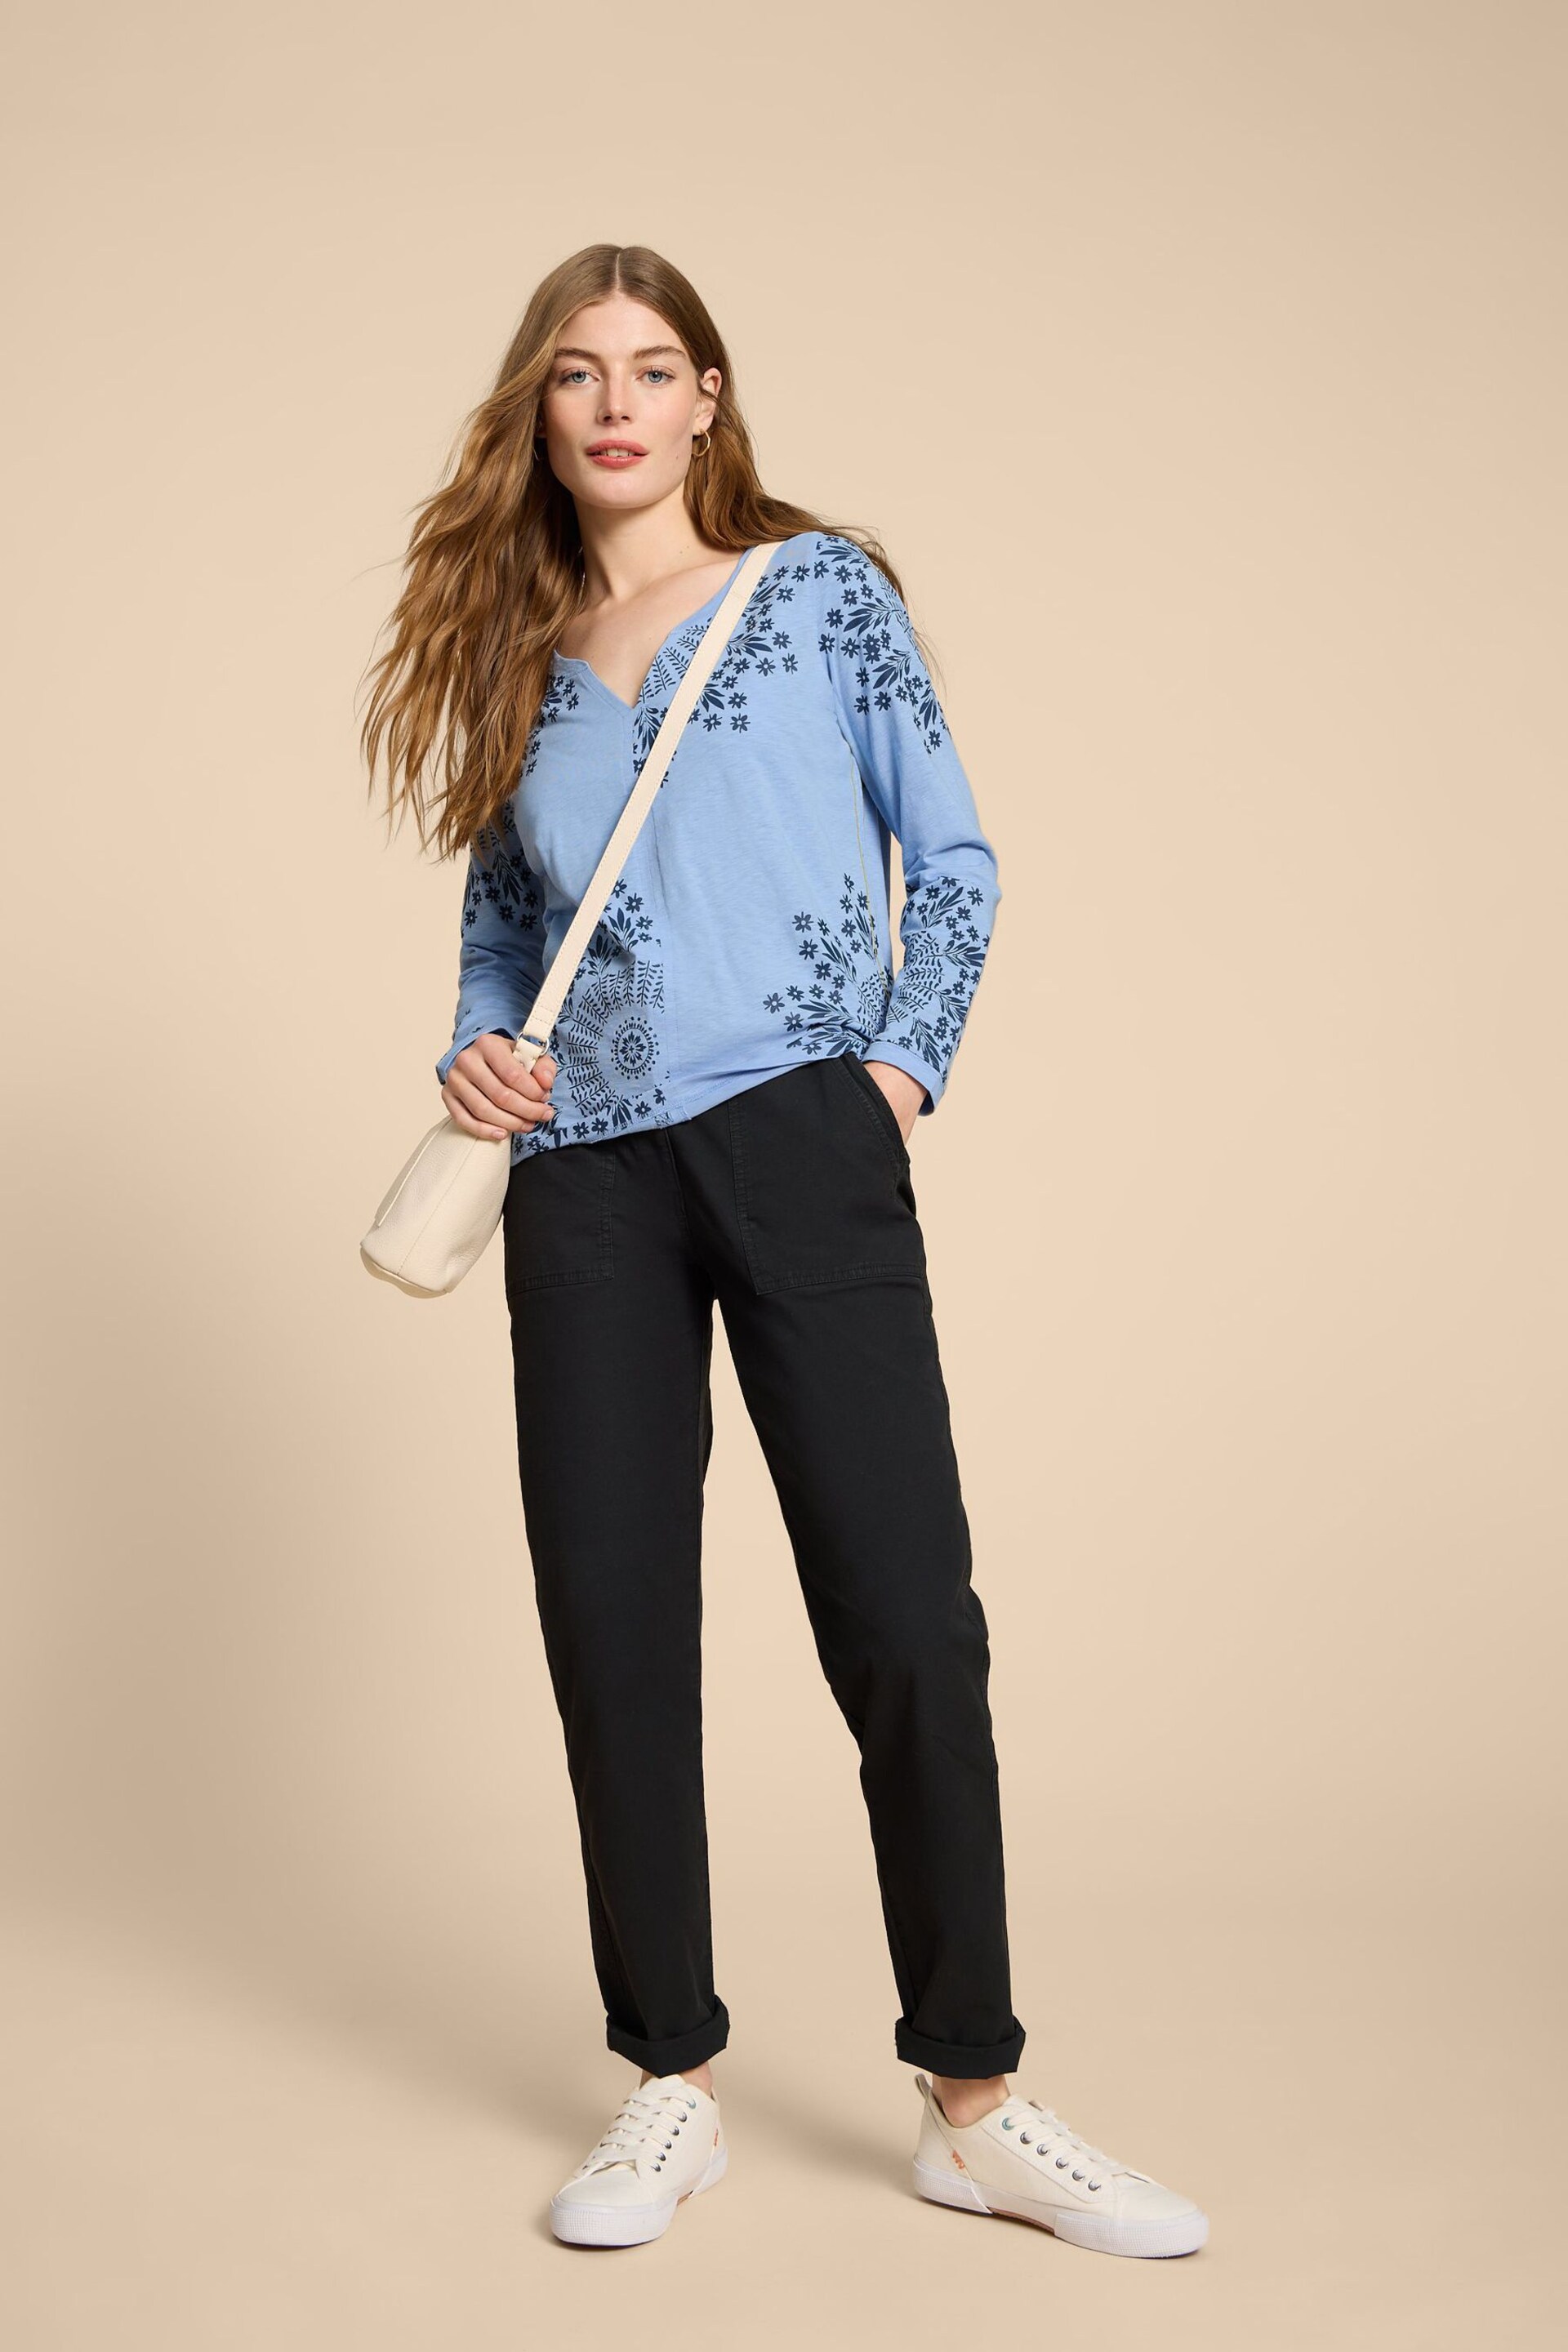 White Stuff Blue Nelly Blouse - Image 3 of 4